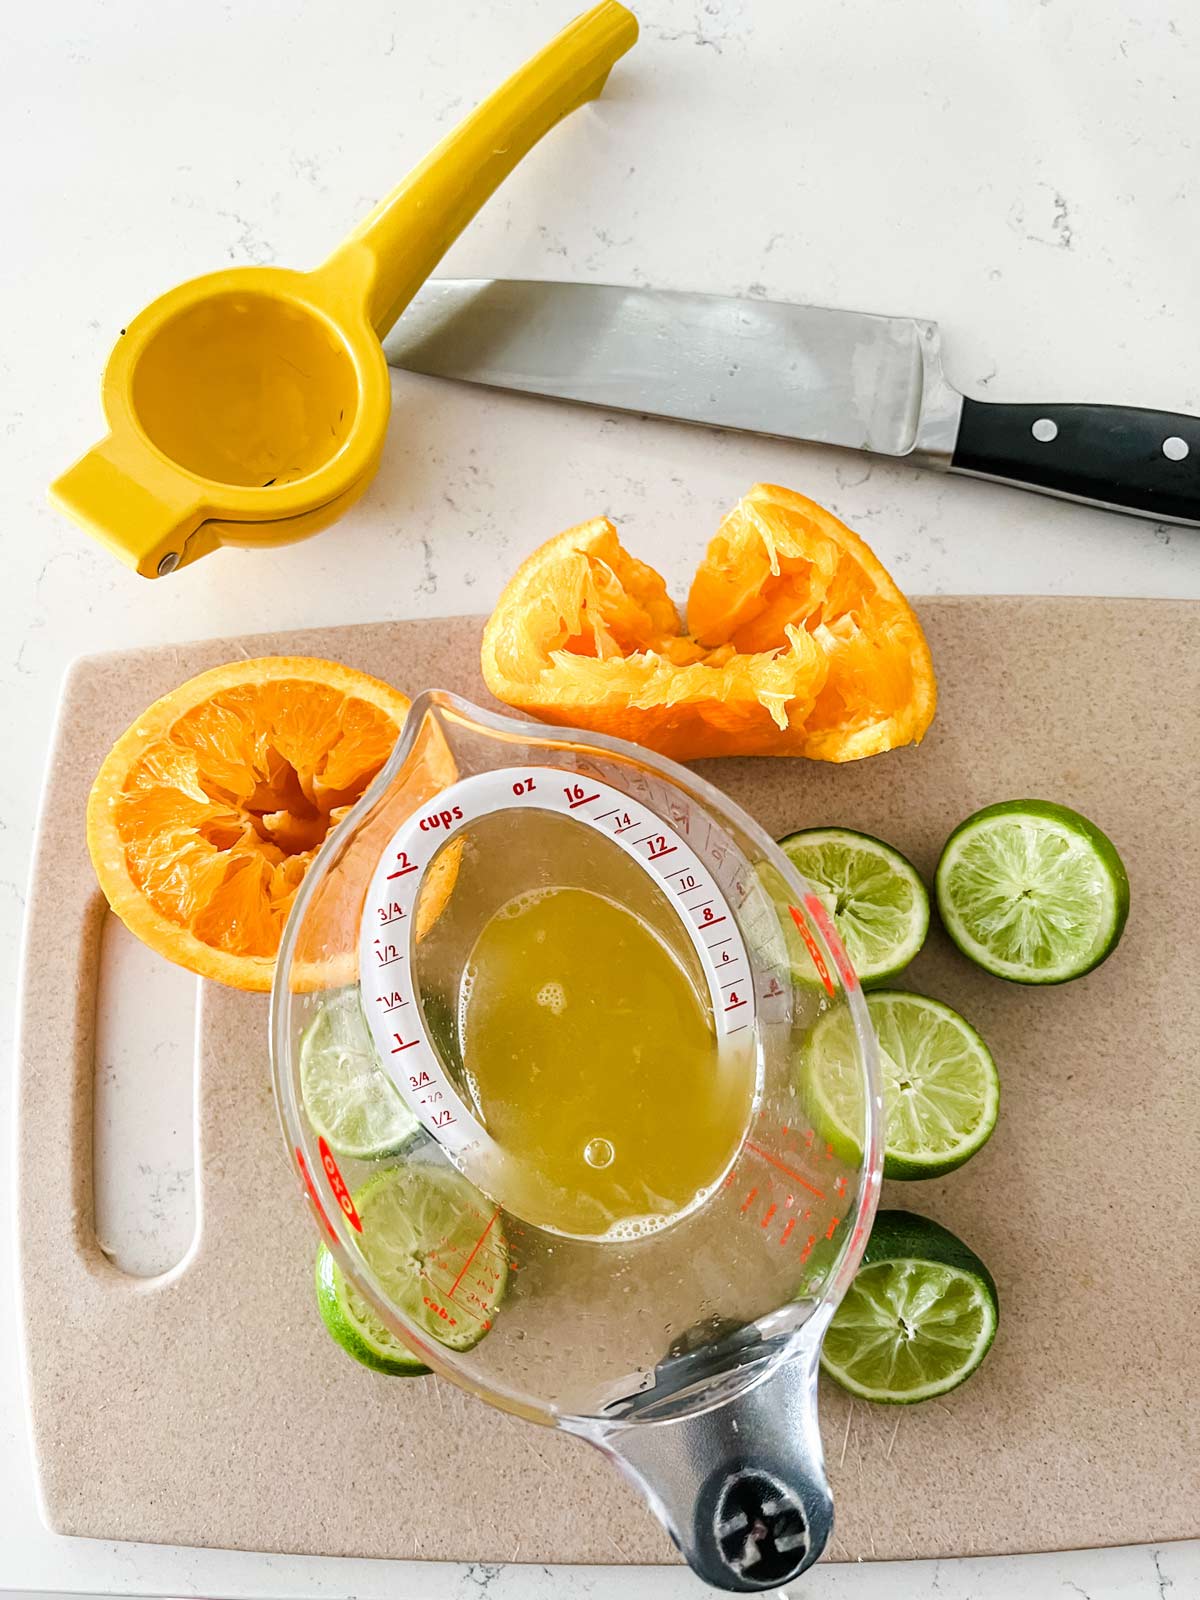 Citrus juices in a measuring cup with squeeze oranges and limes surrounding it.